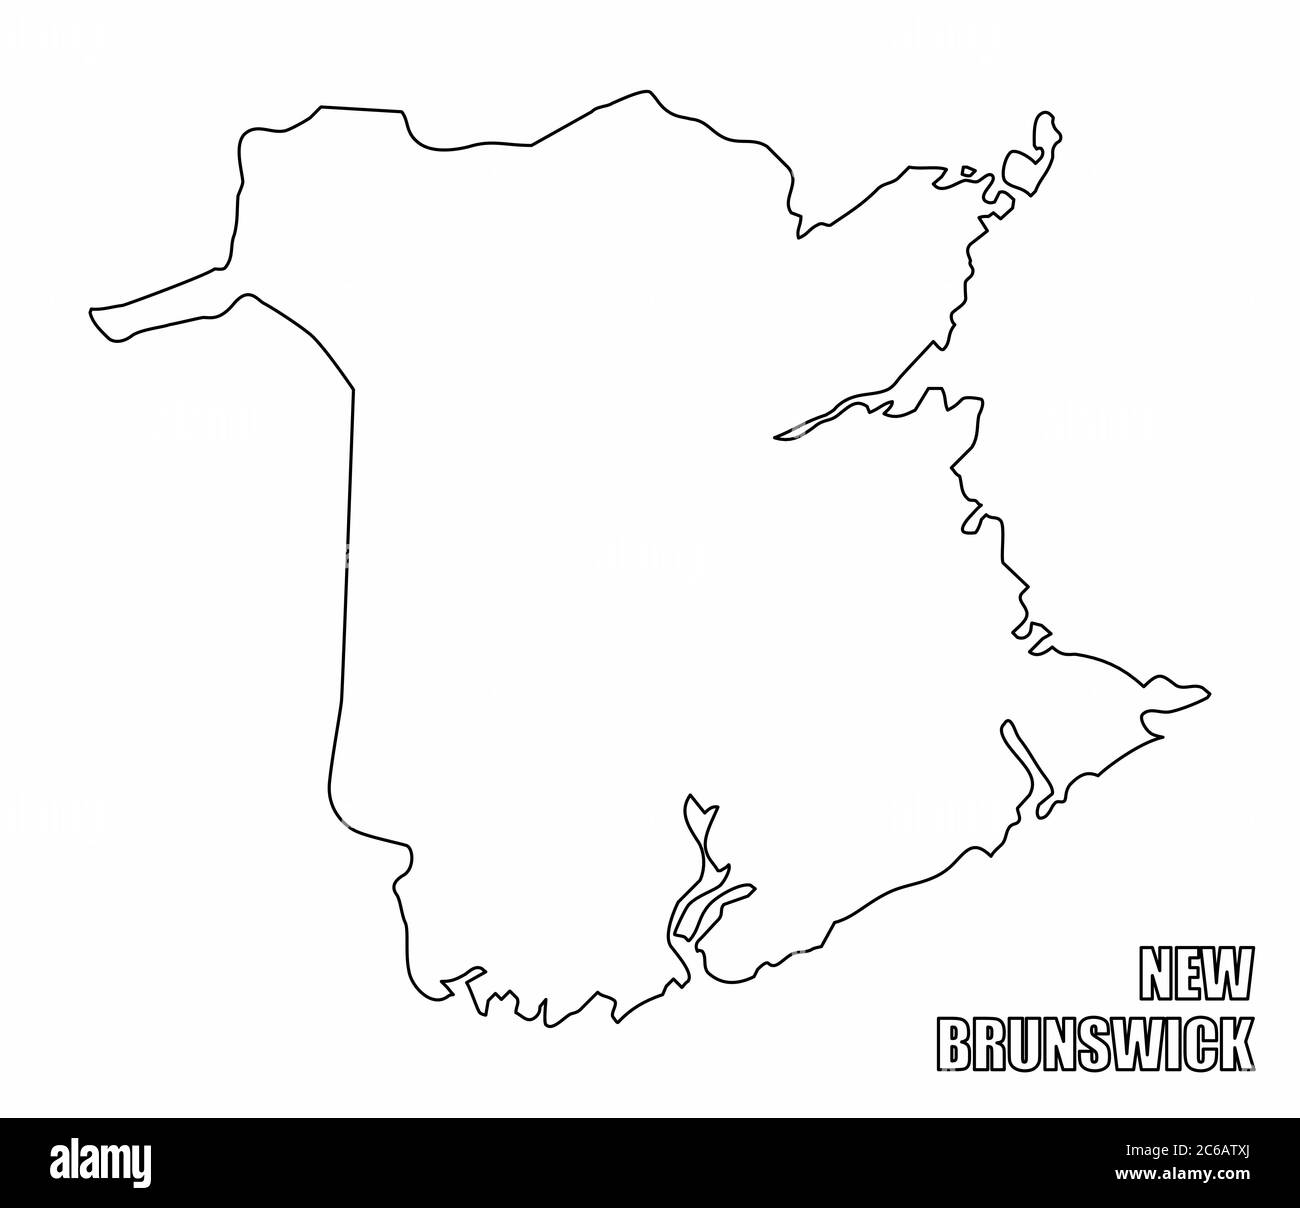 New Brunswick province outline map Stock Vector